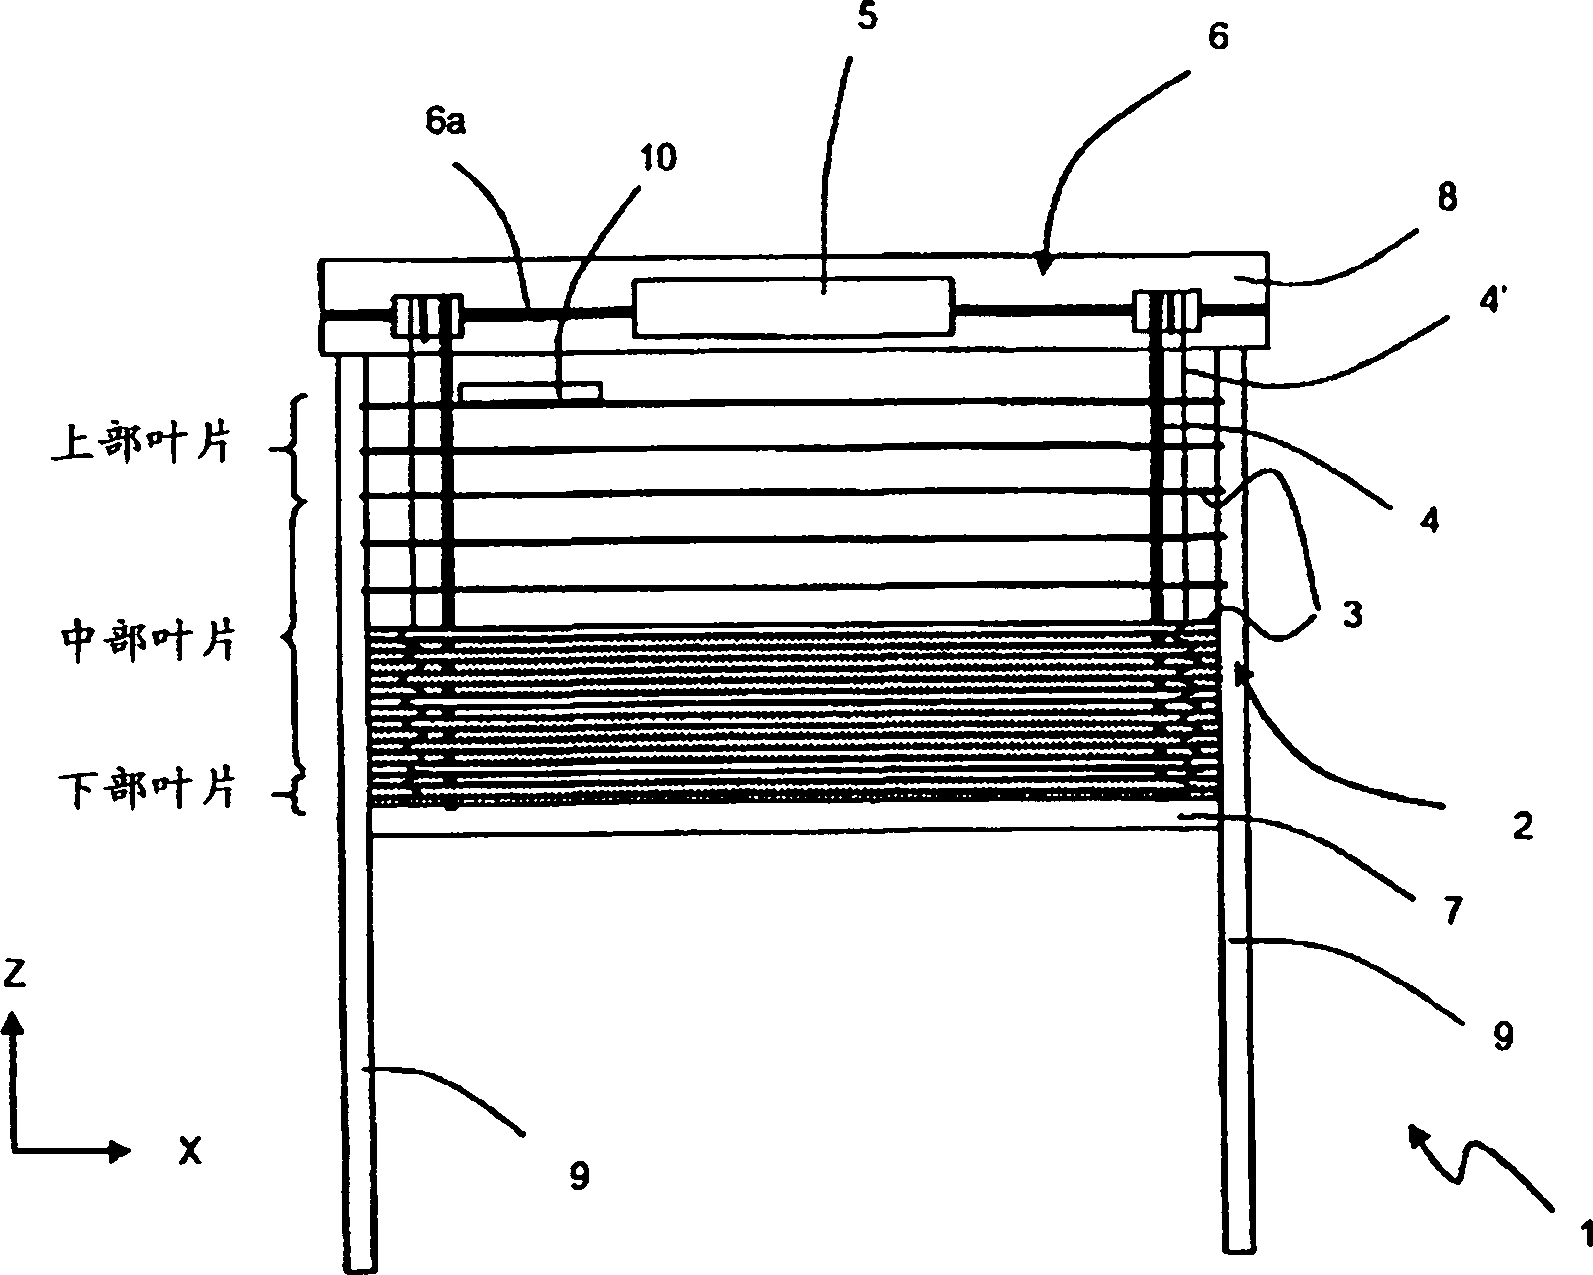 Outer venetian blind with a means for determining the effects of the wind